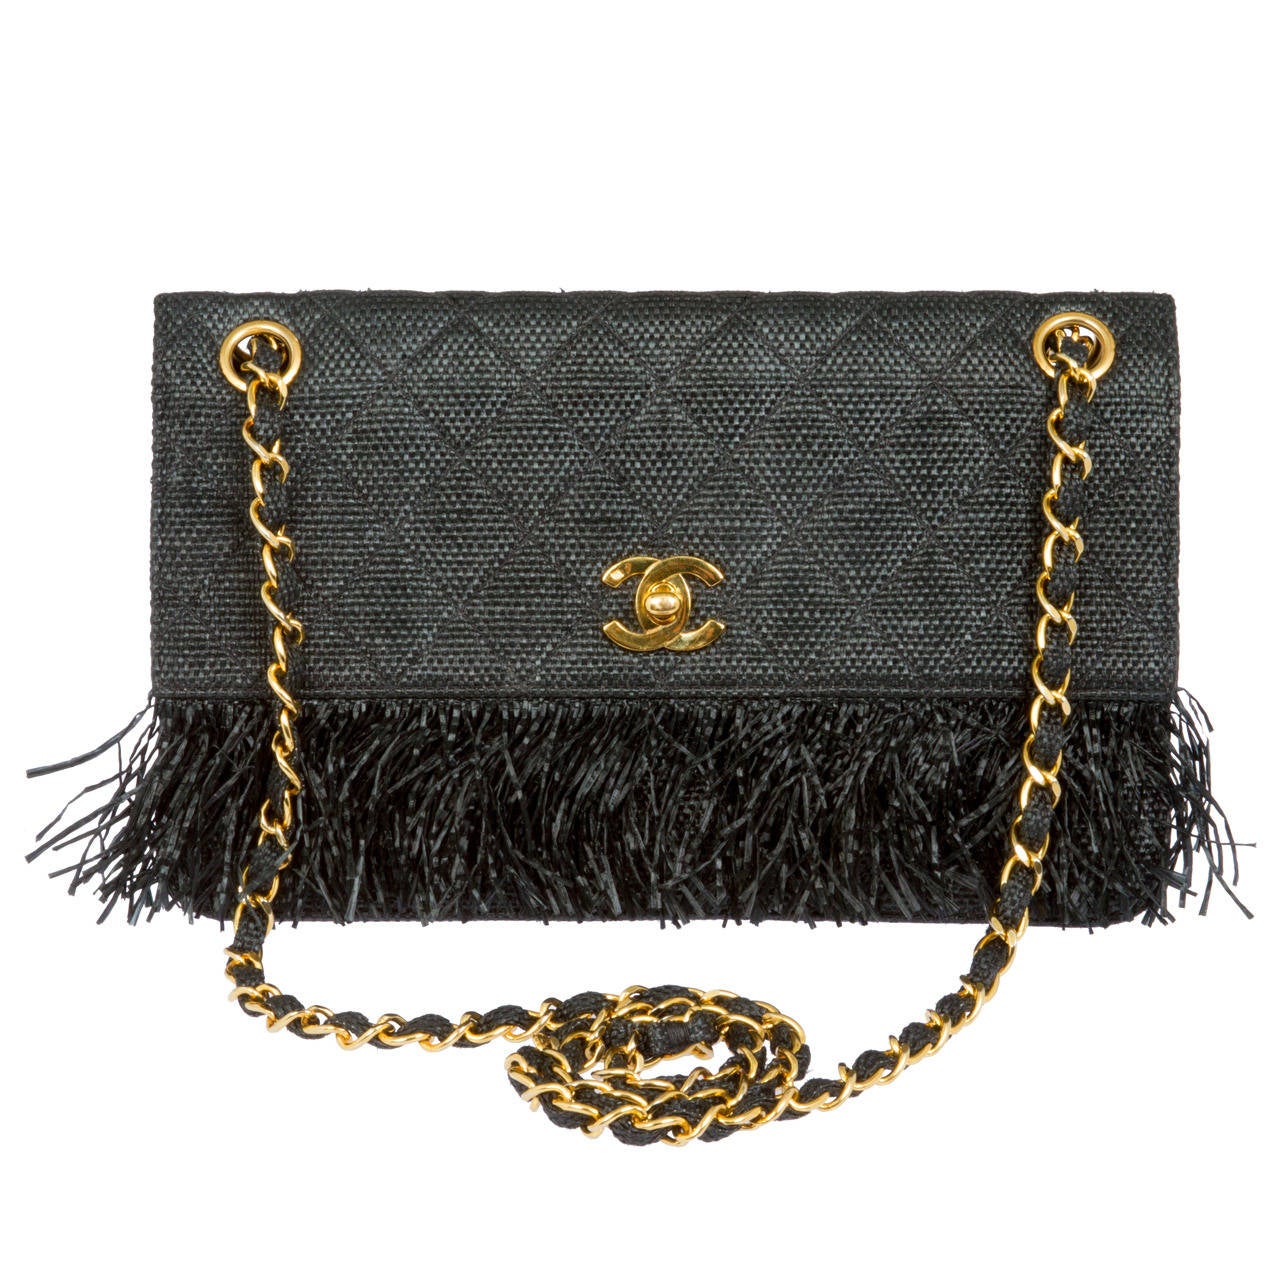 CHANEL  Straw Flap with Fringe Bag